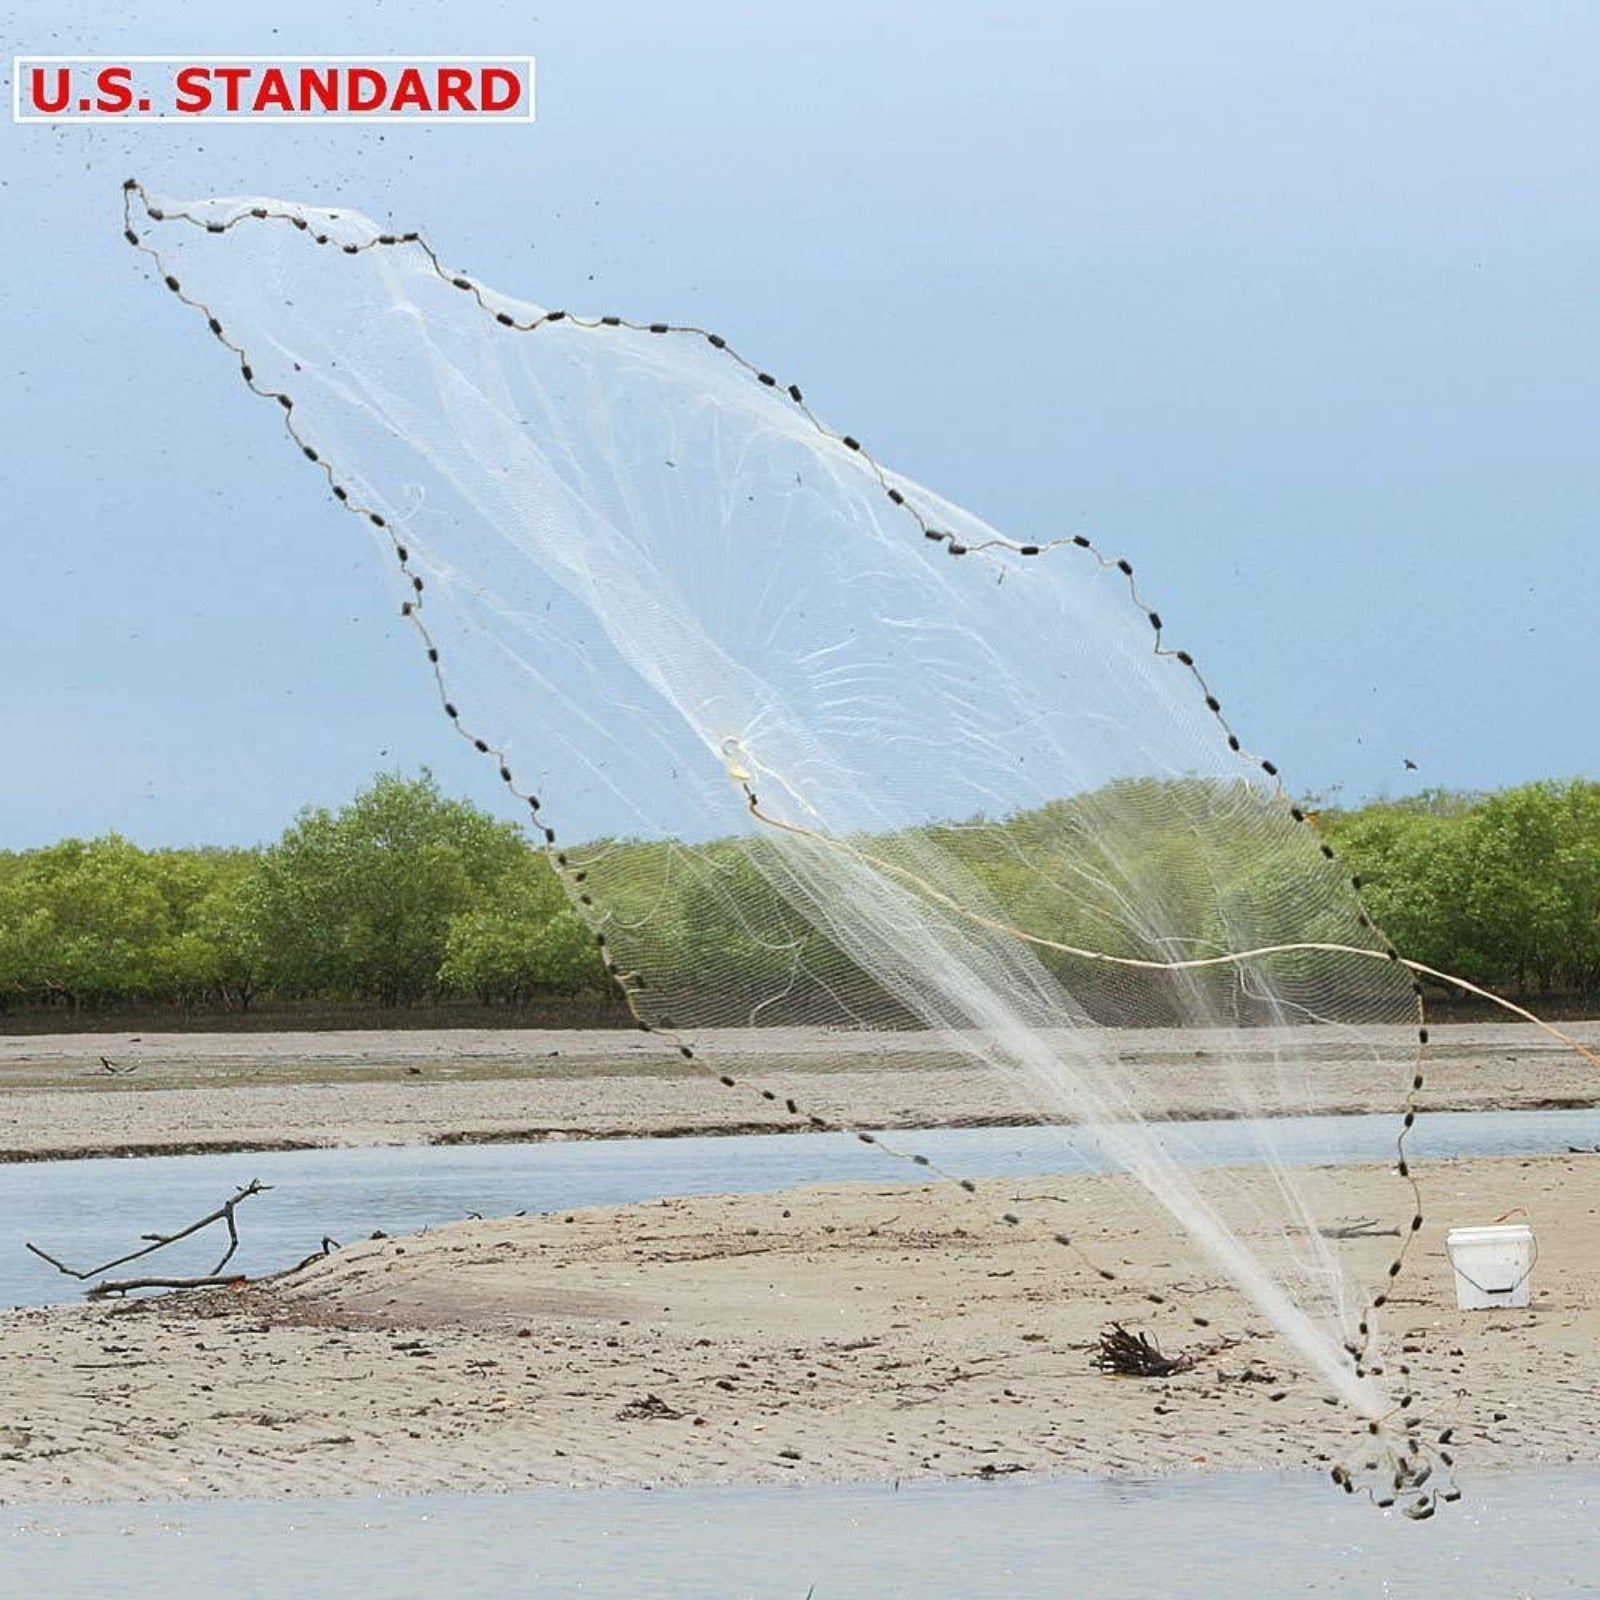 Professional Real Lead Saltwater Heavy Duty Cast Net with Bucket for Bait Trap Fish - GOTURE